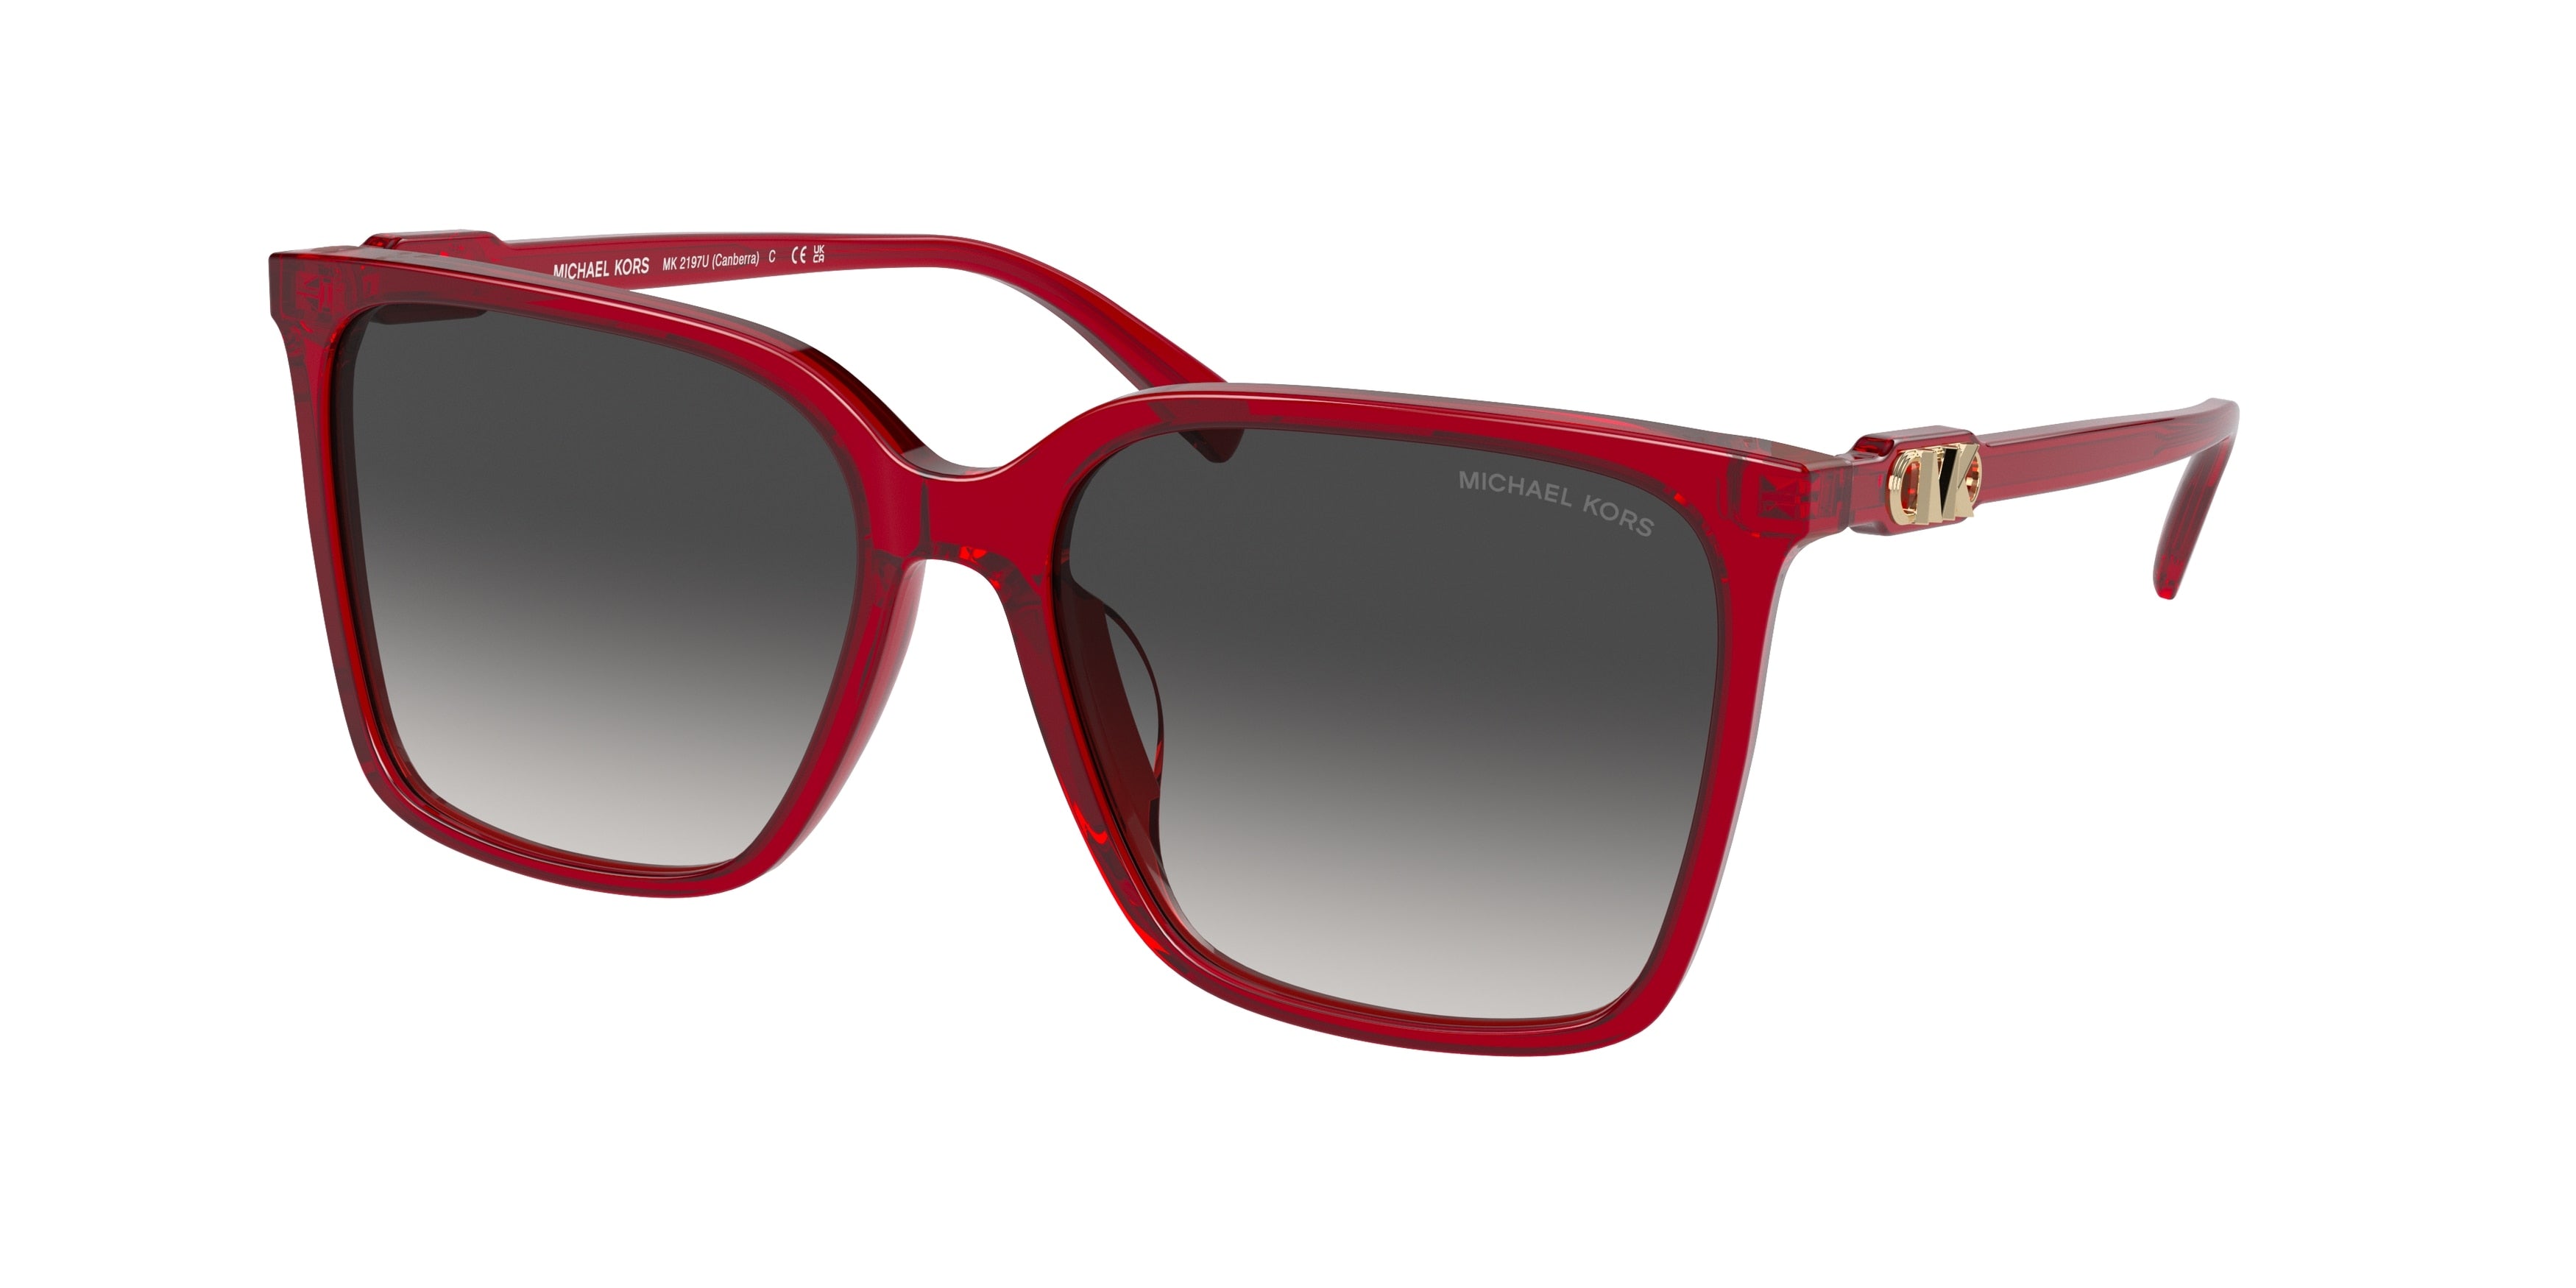 Michael Kors CANBERRA MK2197U Round Sunglasses  39558G-Red 56-140-16 - Color Map Red